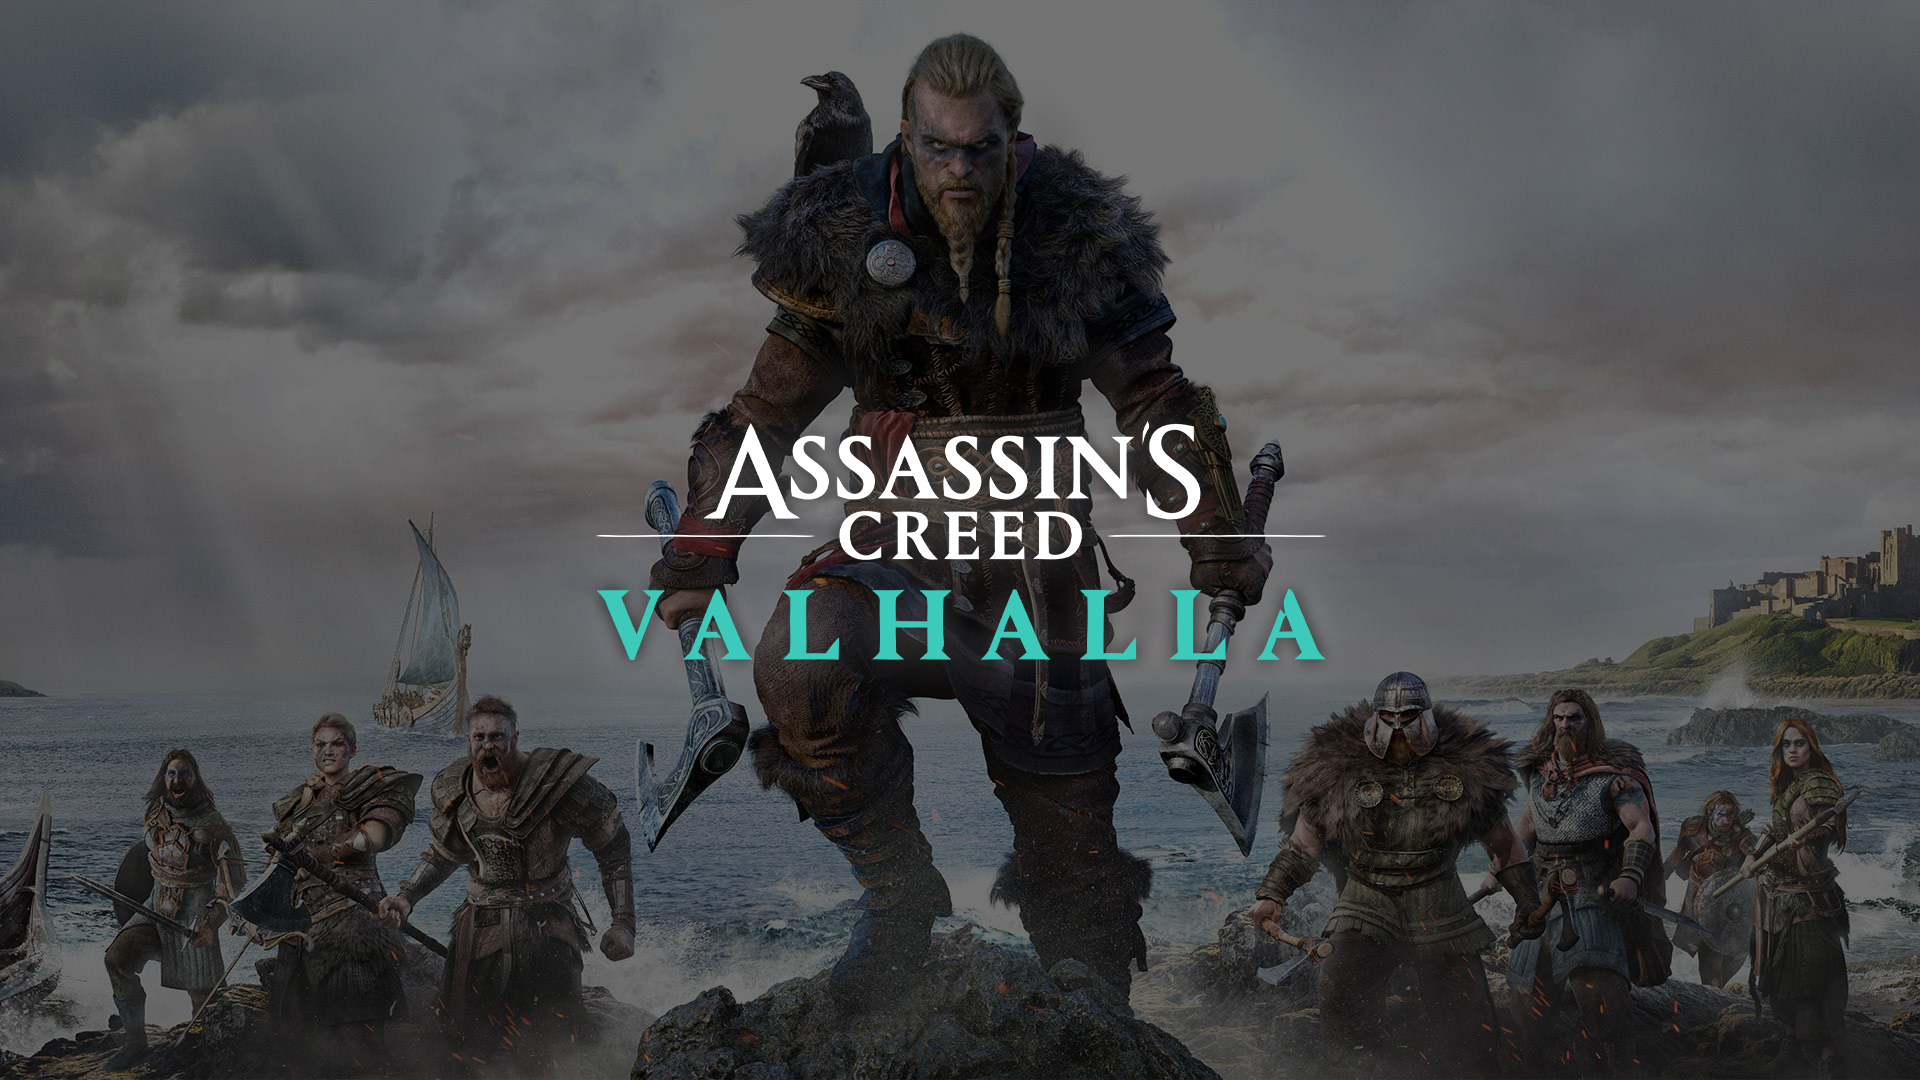 Assassin's Creed Valhalla PC Editions